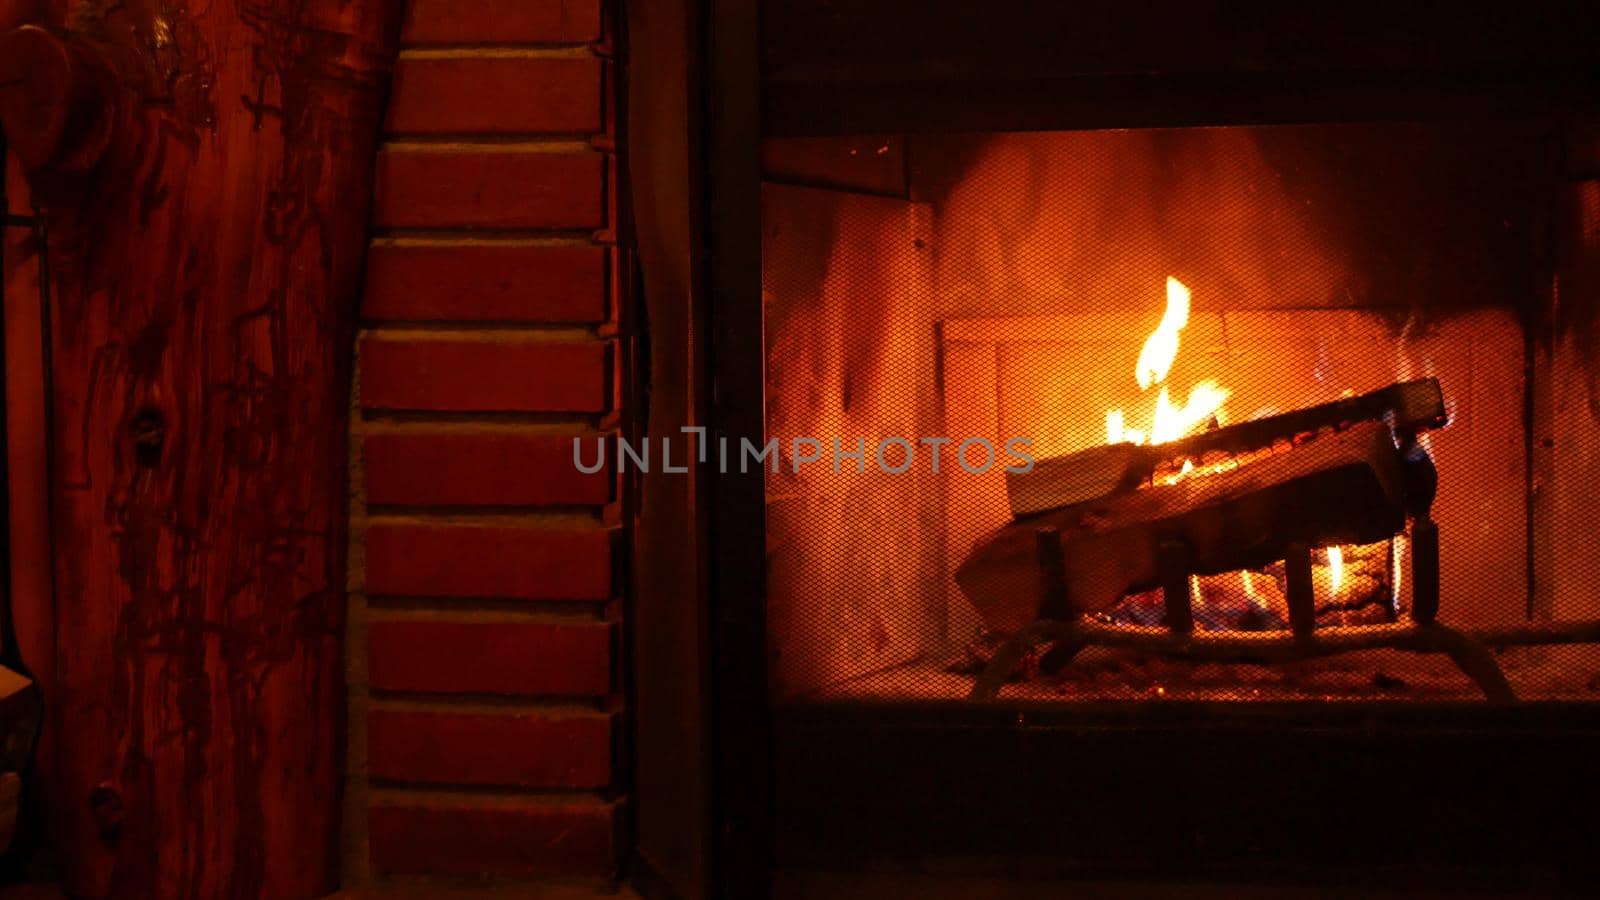 Fire in brick fireplace, firewood burning, wood blazing in cozy lodge or cabin. by DogoraSun